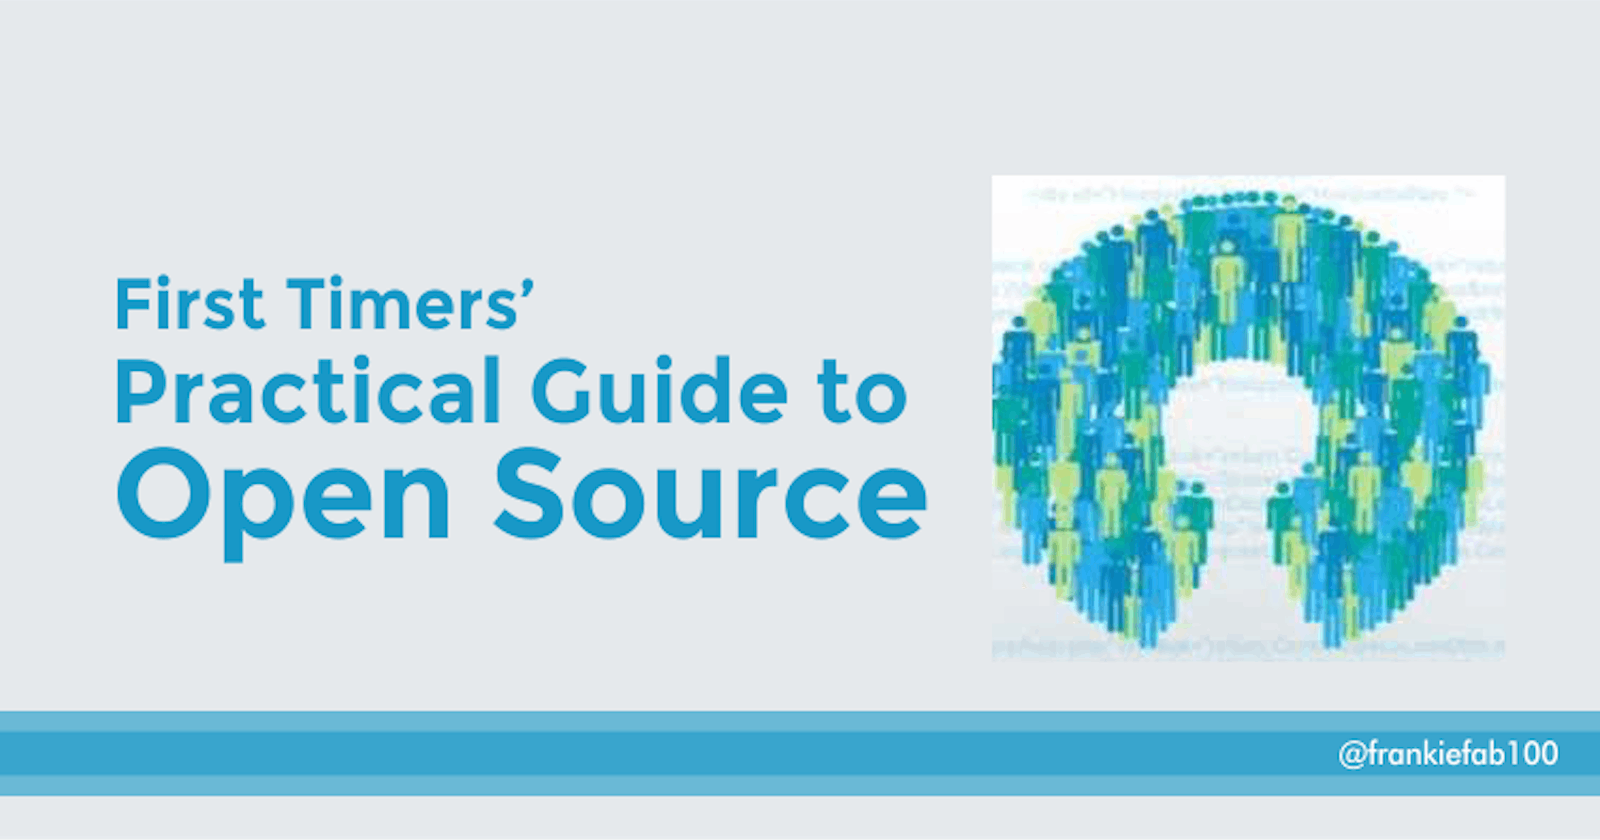 First timers’ Practical Guide to Open Source Contribution